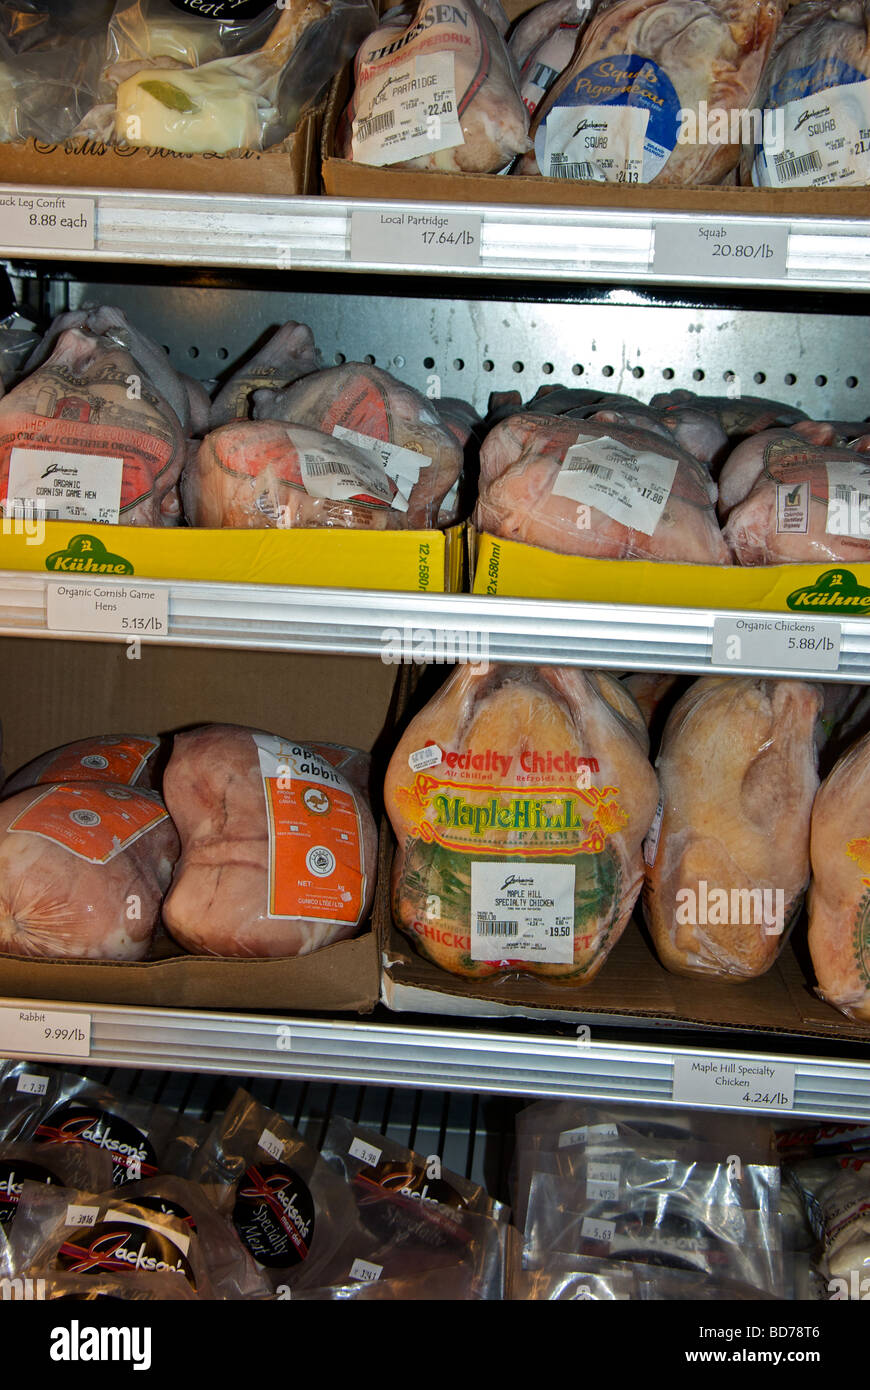 Frozen exotic specialty organic poultry and meats in upright freezer display case Stock Photo